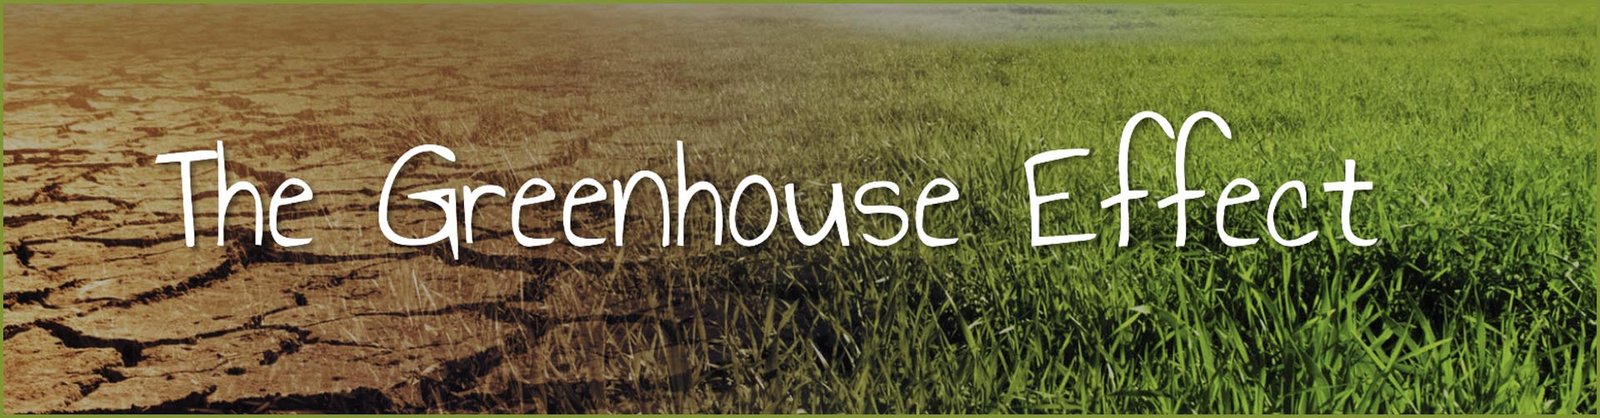 The Greenhouse effect